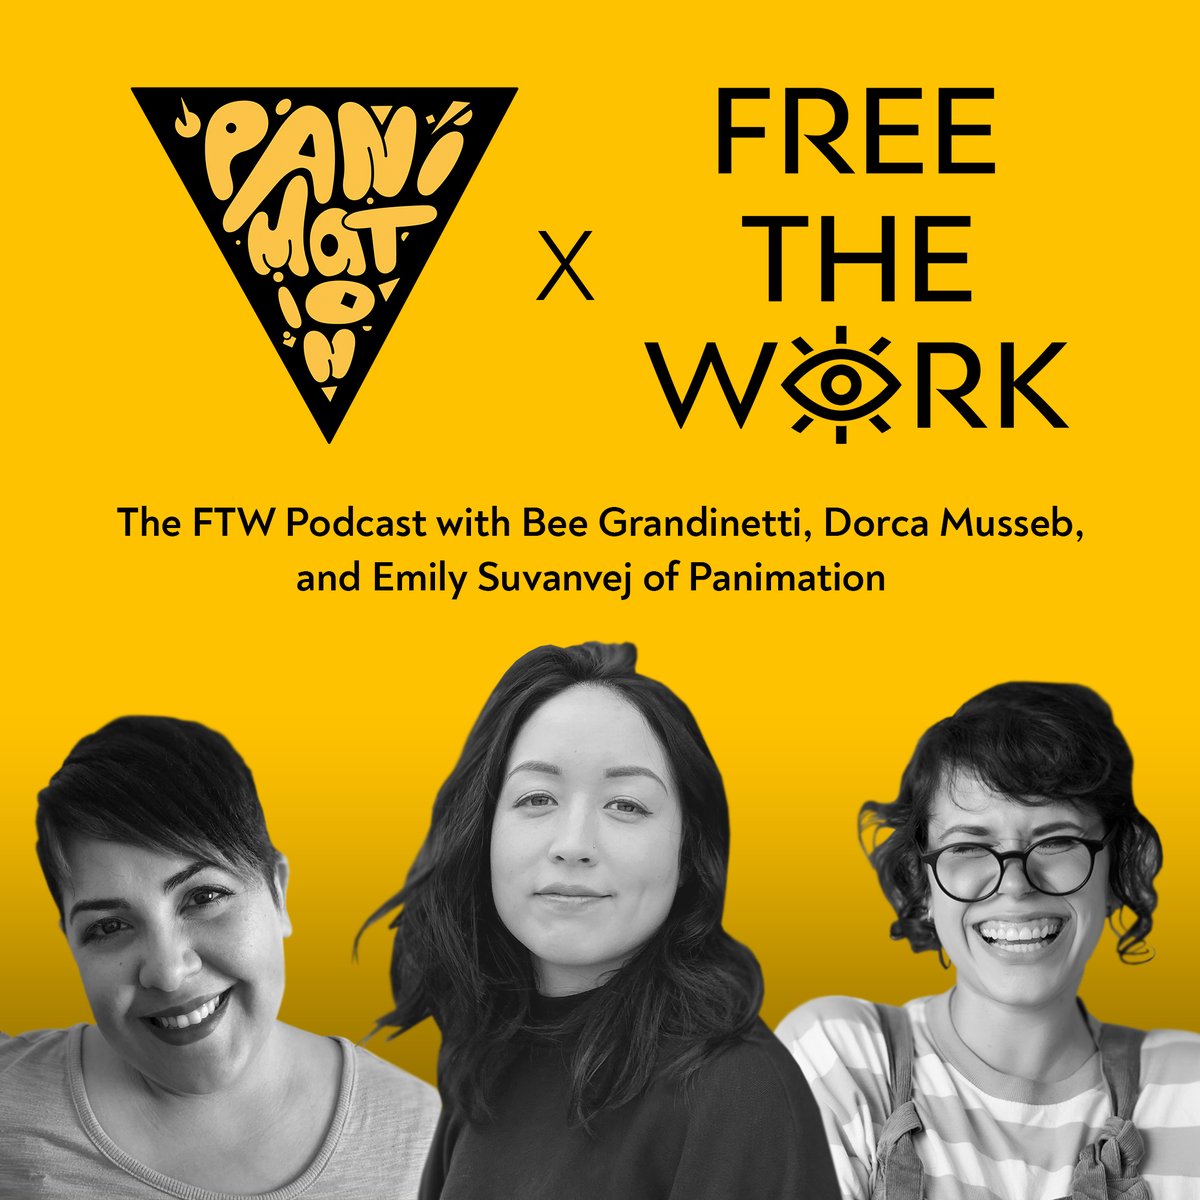 In honor of our  @panimation_tv IG takeover, we have  @beezilda,  @emilysuvanvej, &  @dorcaMusseb on the FREE THE WORK podcast.They tackle topics about the world of animation & fighting to make the industry more inclusive for underrepresented creators. http://ow.ly/c0w950zjATf 